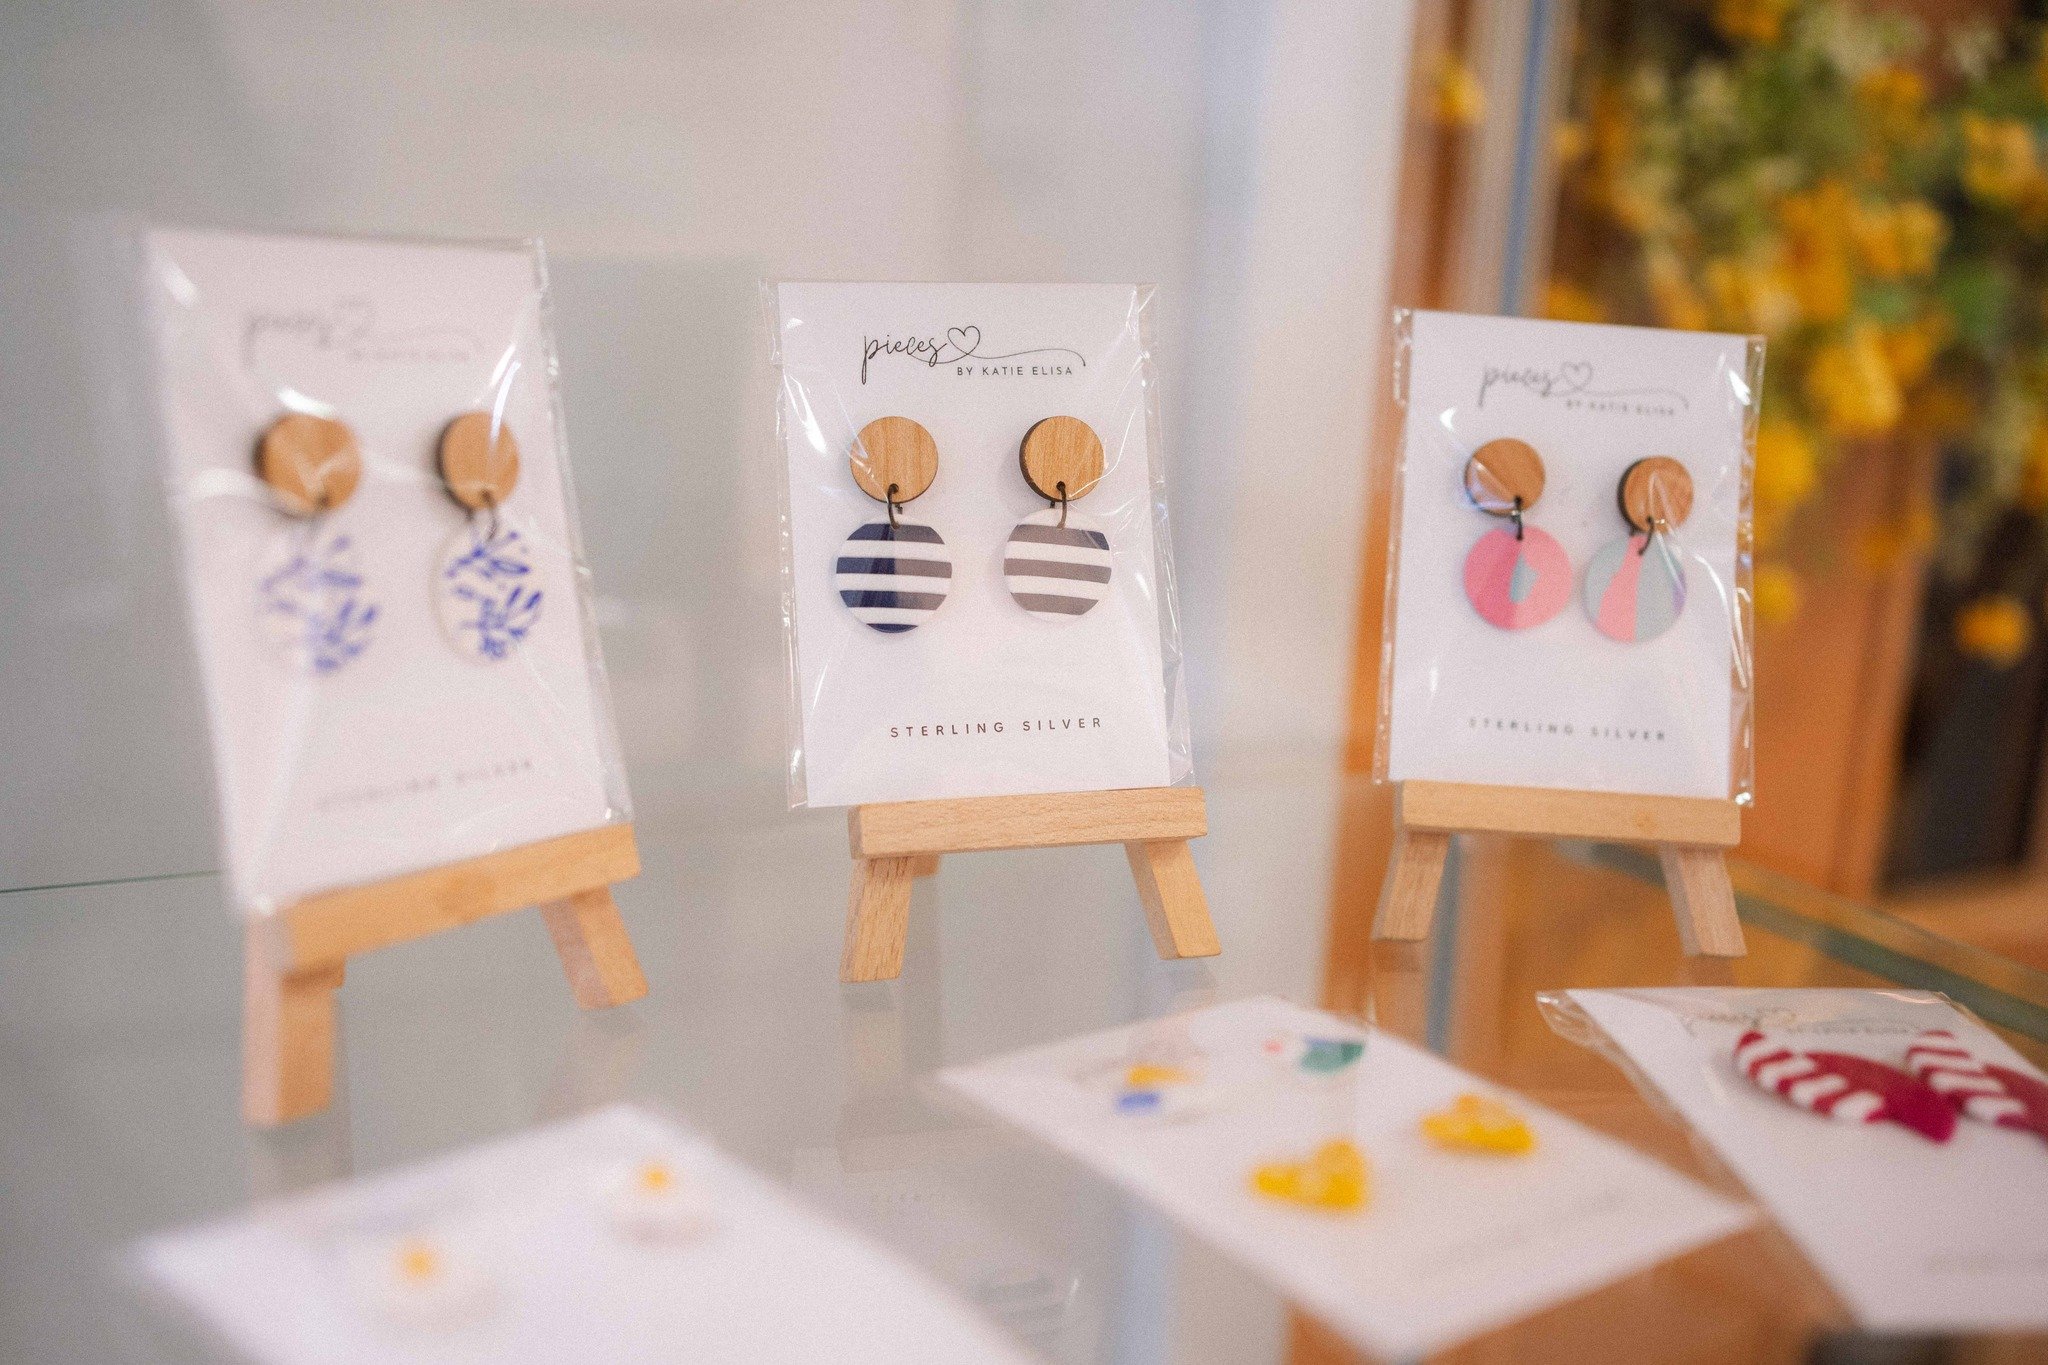 Elevate your style with the exquisite polymer clay jewellery from Pieces by Katie Elisa (@pieces_katie_elisa_), now available at The Gallery Art + Coffee Shop! Each piece is handcrafted with love and creativity, making them the perfect accessory for 